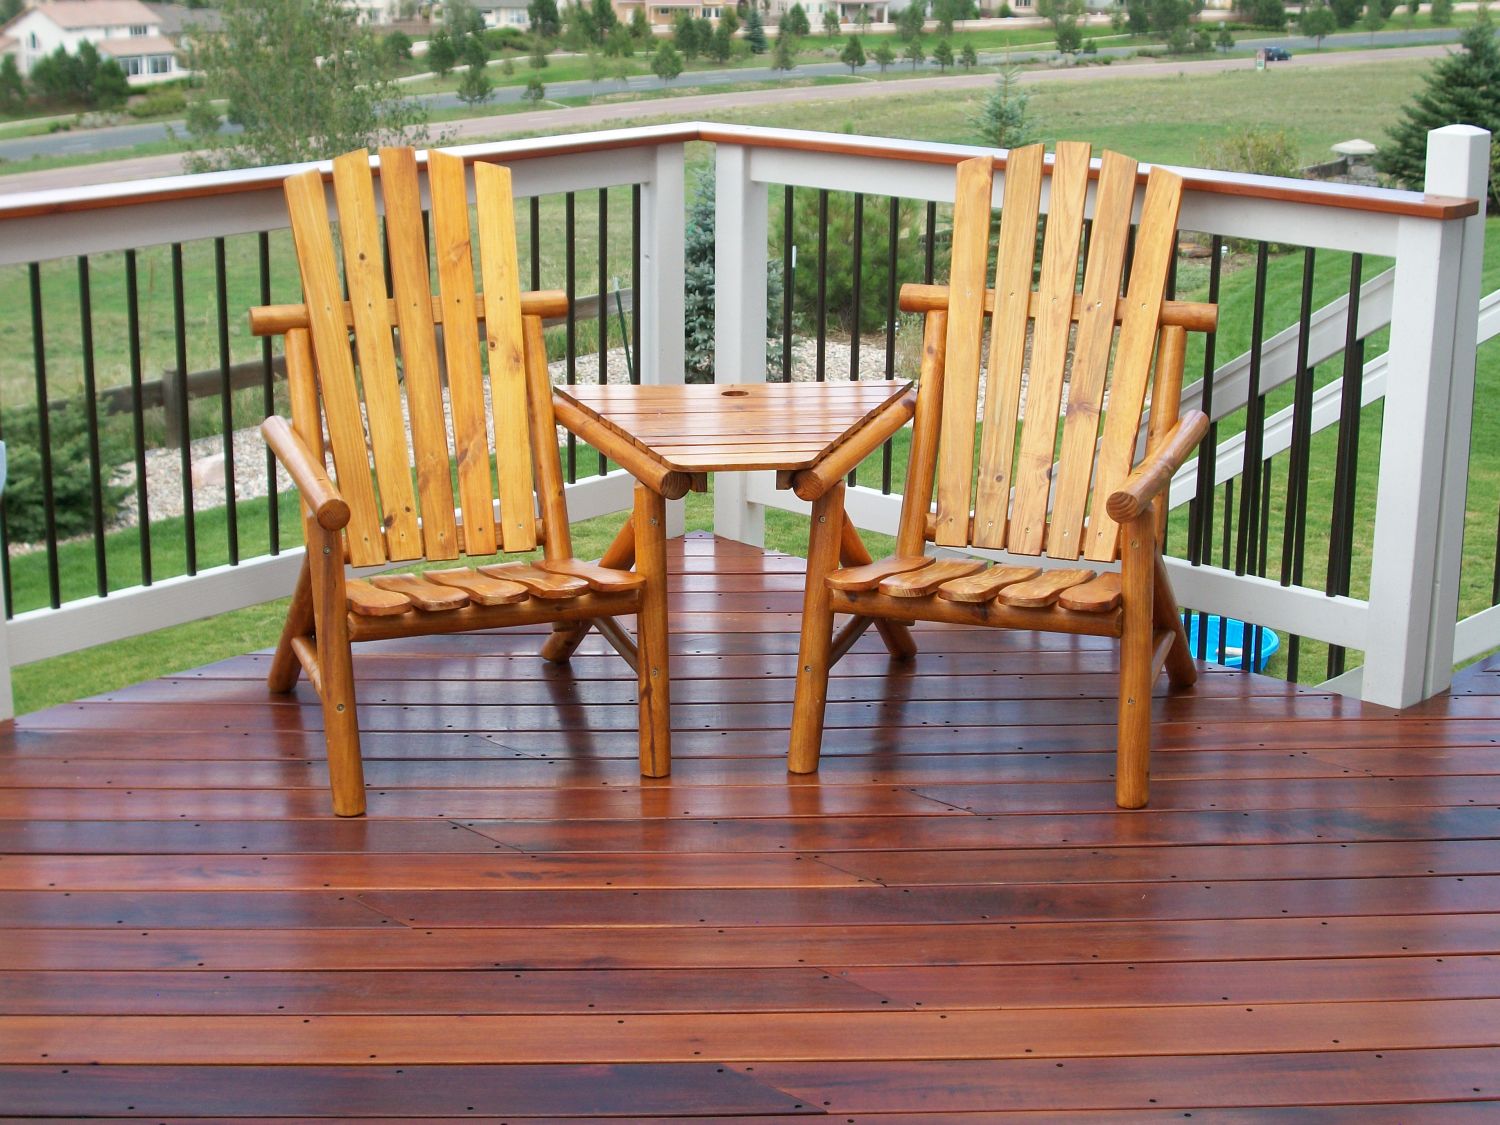 Gorgeous hardwood deck in Tigerwood with two Adirondack chairs